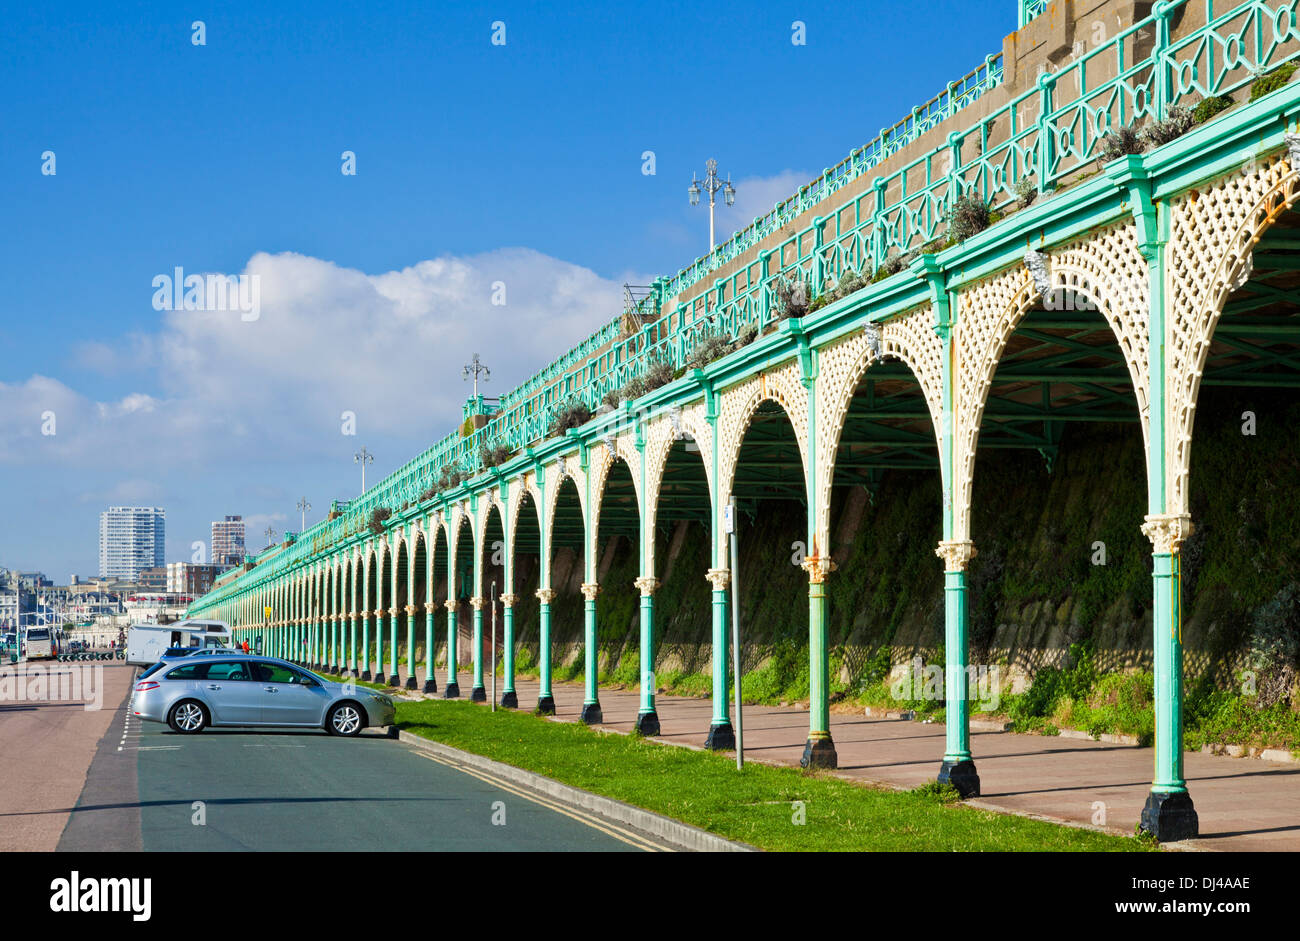 Ornate iron lacework of the arches on Madeira drive Brighton East Sussex England GB UK EU Europe Stock Photo